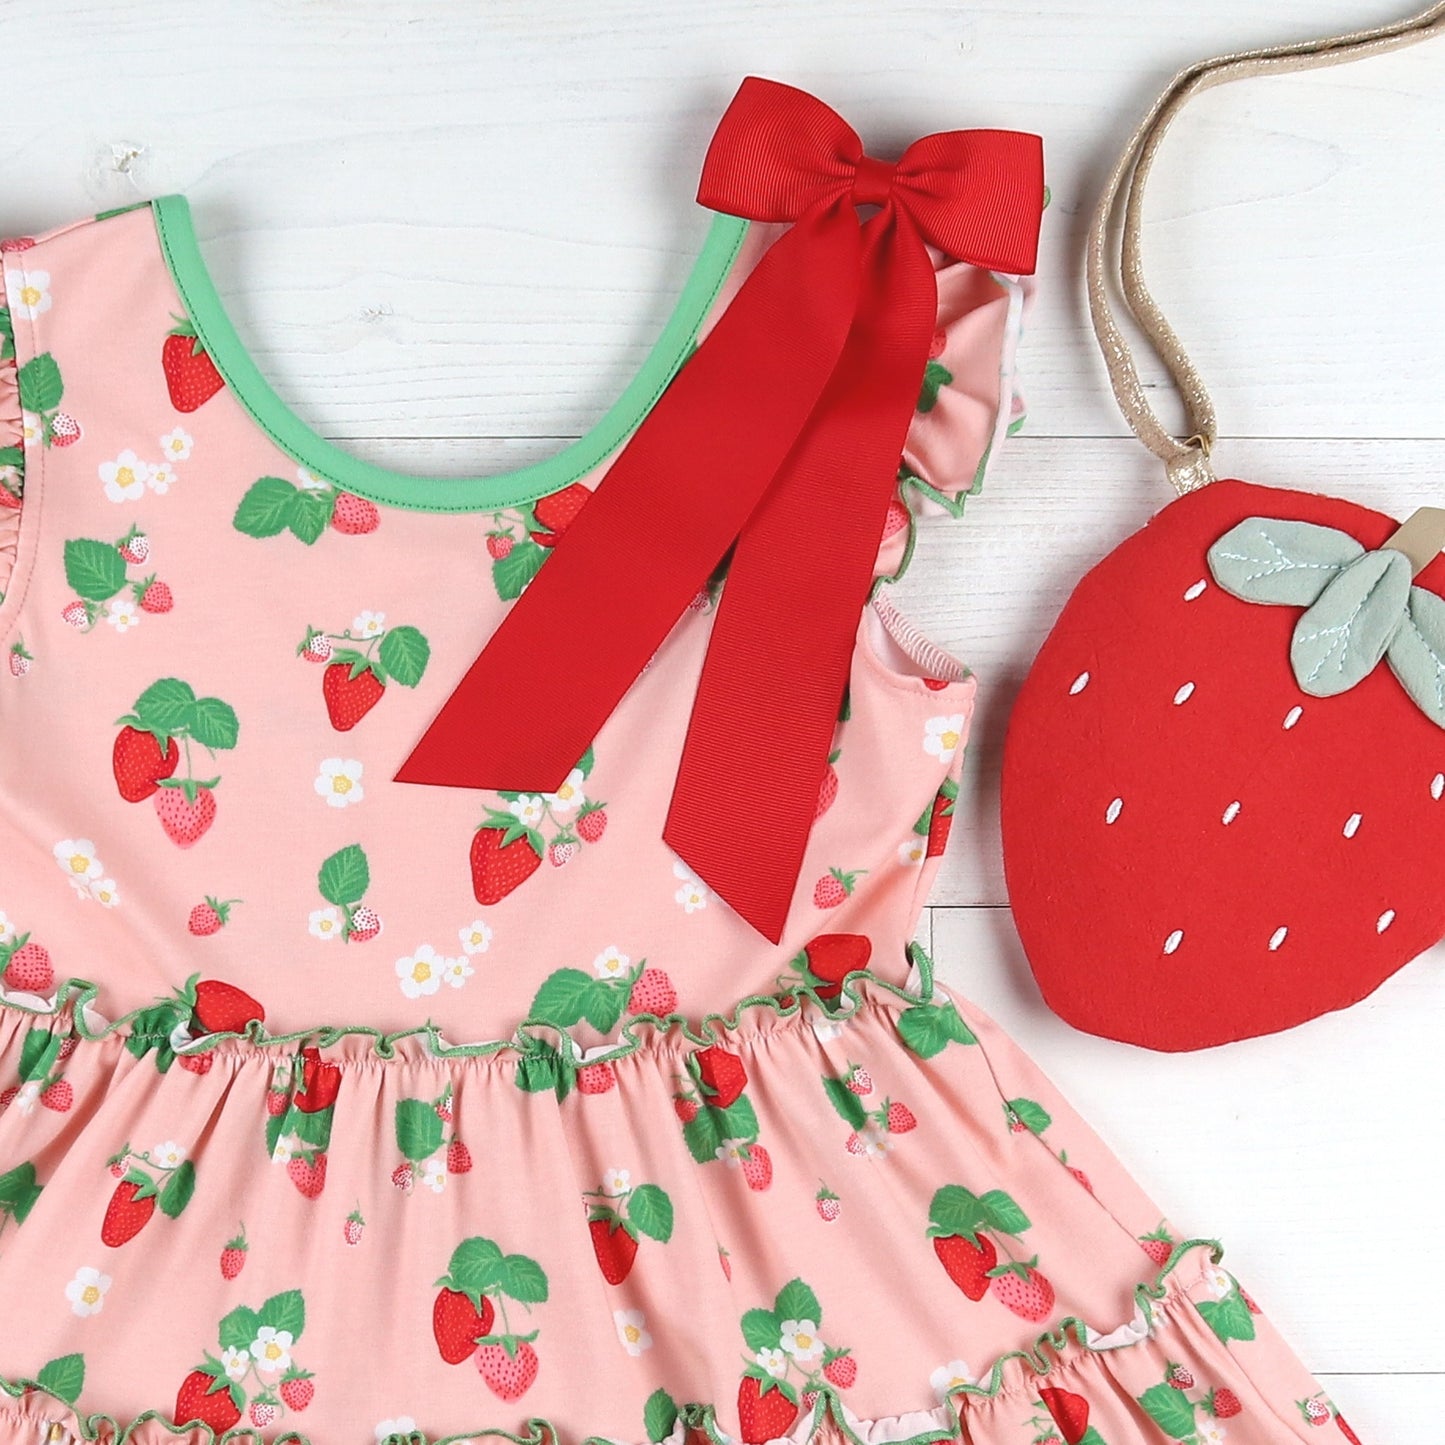 Strawberry Purse - add to cart w/ any strawberry shortcake collection item for 30% off